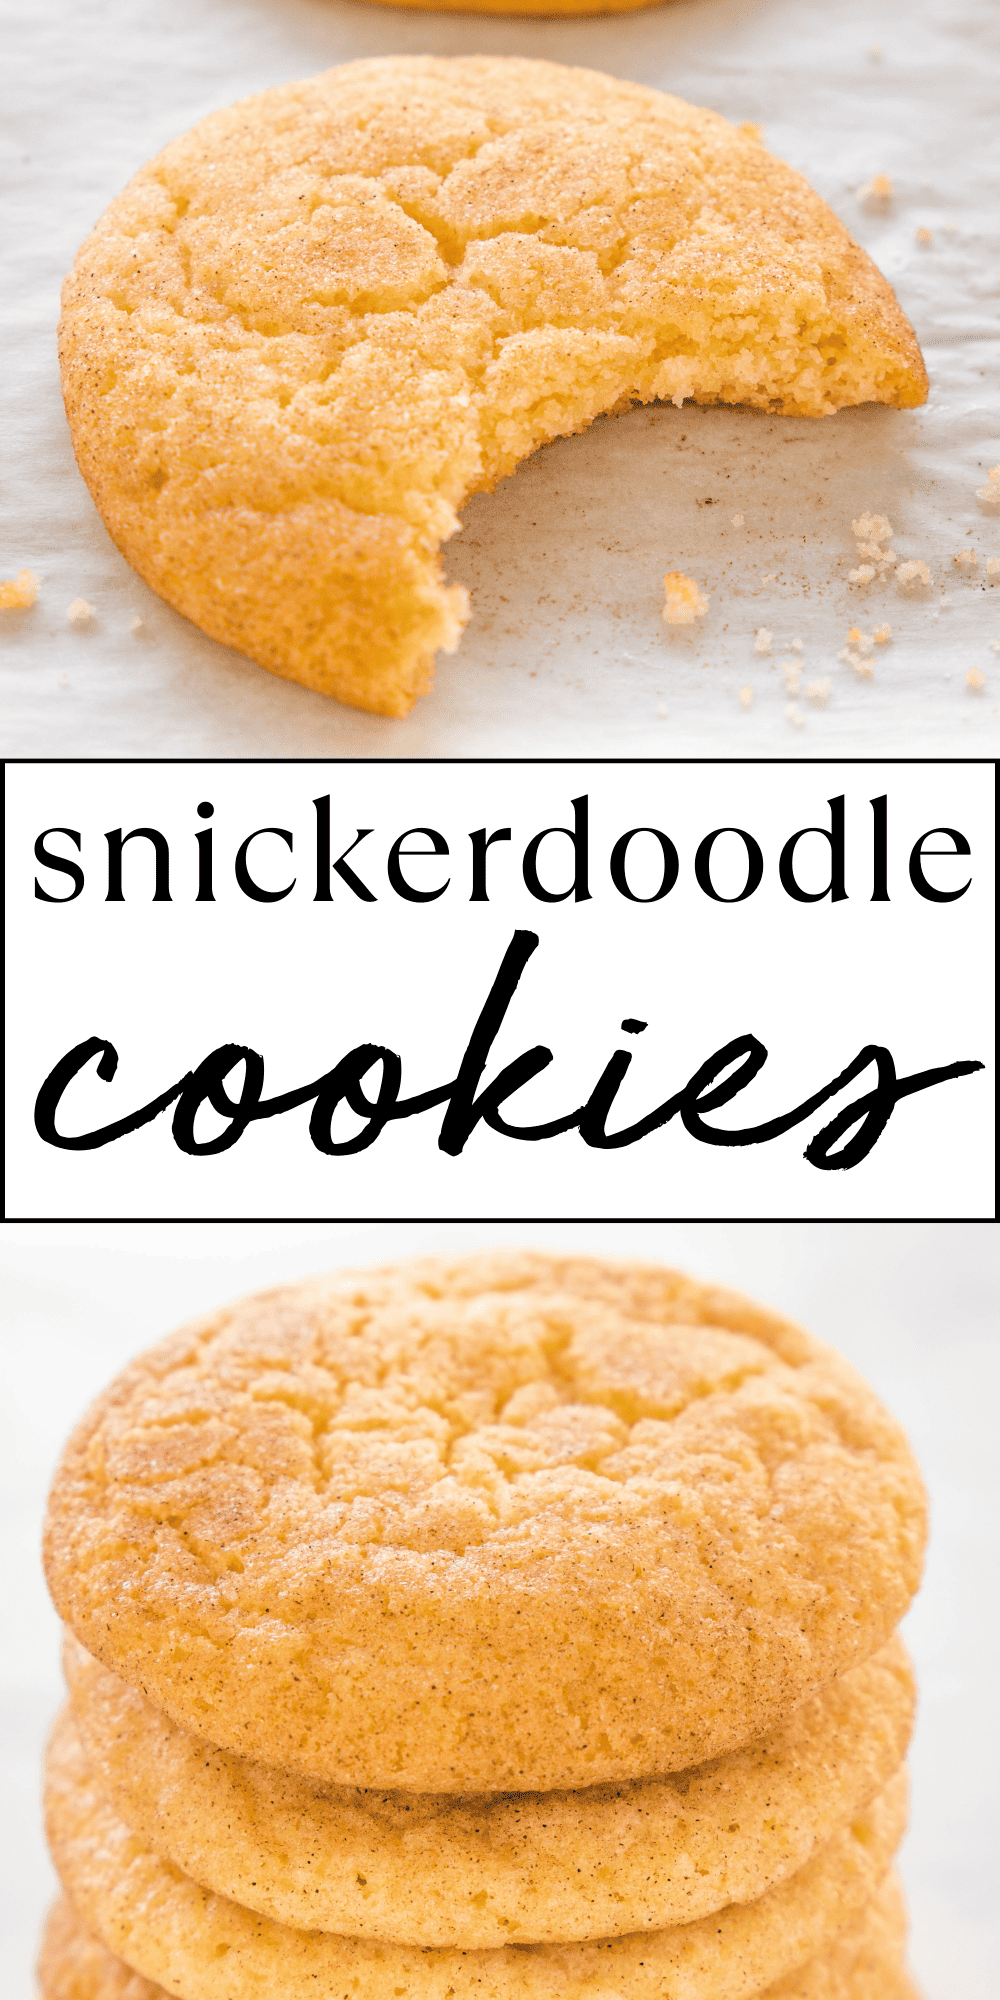 This Snickerdoodle recipe makes the most delicious cinnamon sugar Snickerdoodle cookies! Perfectly soft with a crispy crinkle coating and easy to make in one bowl! Recipe from thebusybaker.ca! #snickerdoodle #cinnamonsugar #snickerdoodles #snickerdoodlecookies #easycookierecipe #sugarcookies #bakingcookies #cookies #cookierecipe #snickerdoodlecookierecipe #snickerdoodlerecipe via @busybakerblog